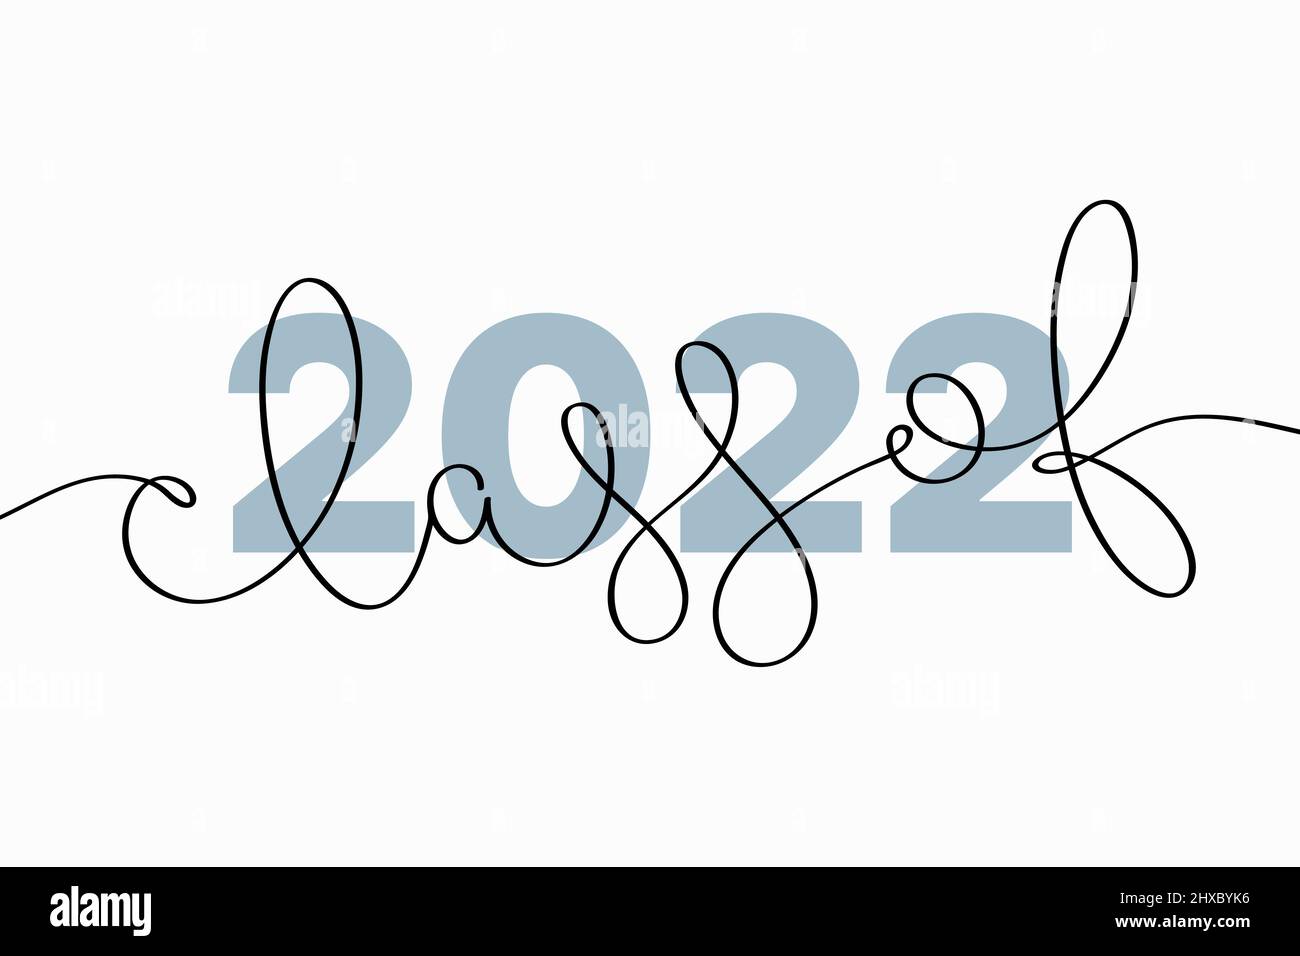 Class of 2022 lettering. Vector illustration of creative typography with continuous one line hand drawn text isolated on white background Stock Vector